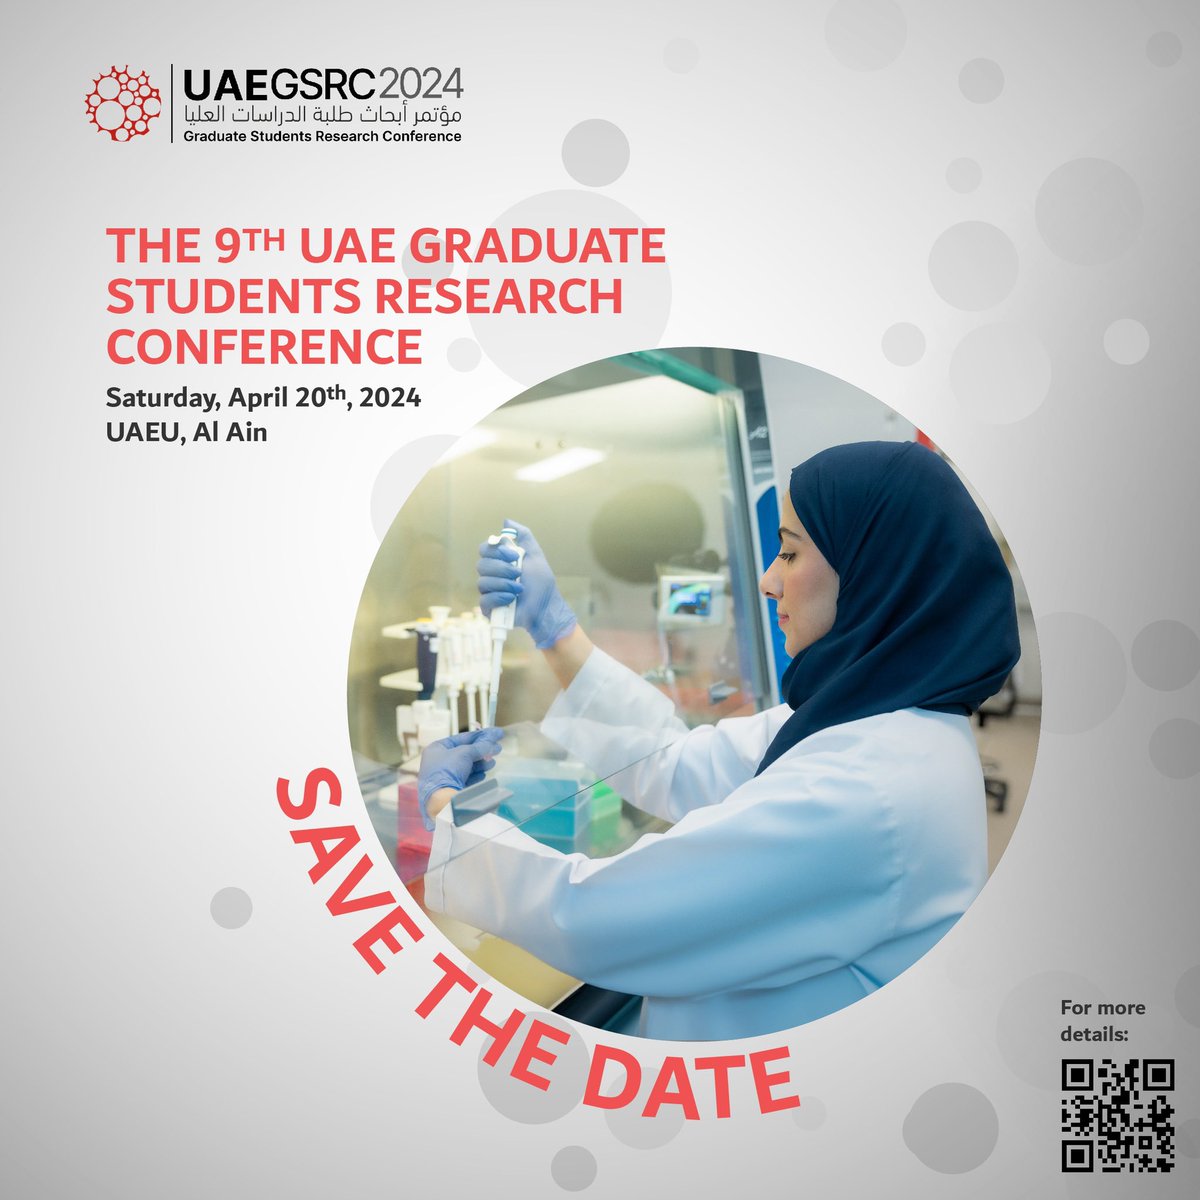 Enriching minds, shaping futures!

Join us at the 9th UAE Graduate Students Research Conference on April 20, 2024, at the United Arab Emirates University.

#UAEGSRC2024